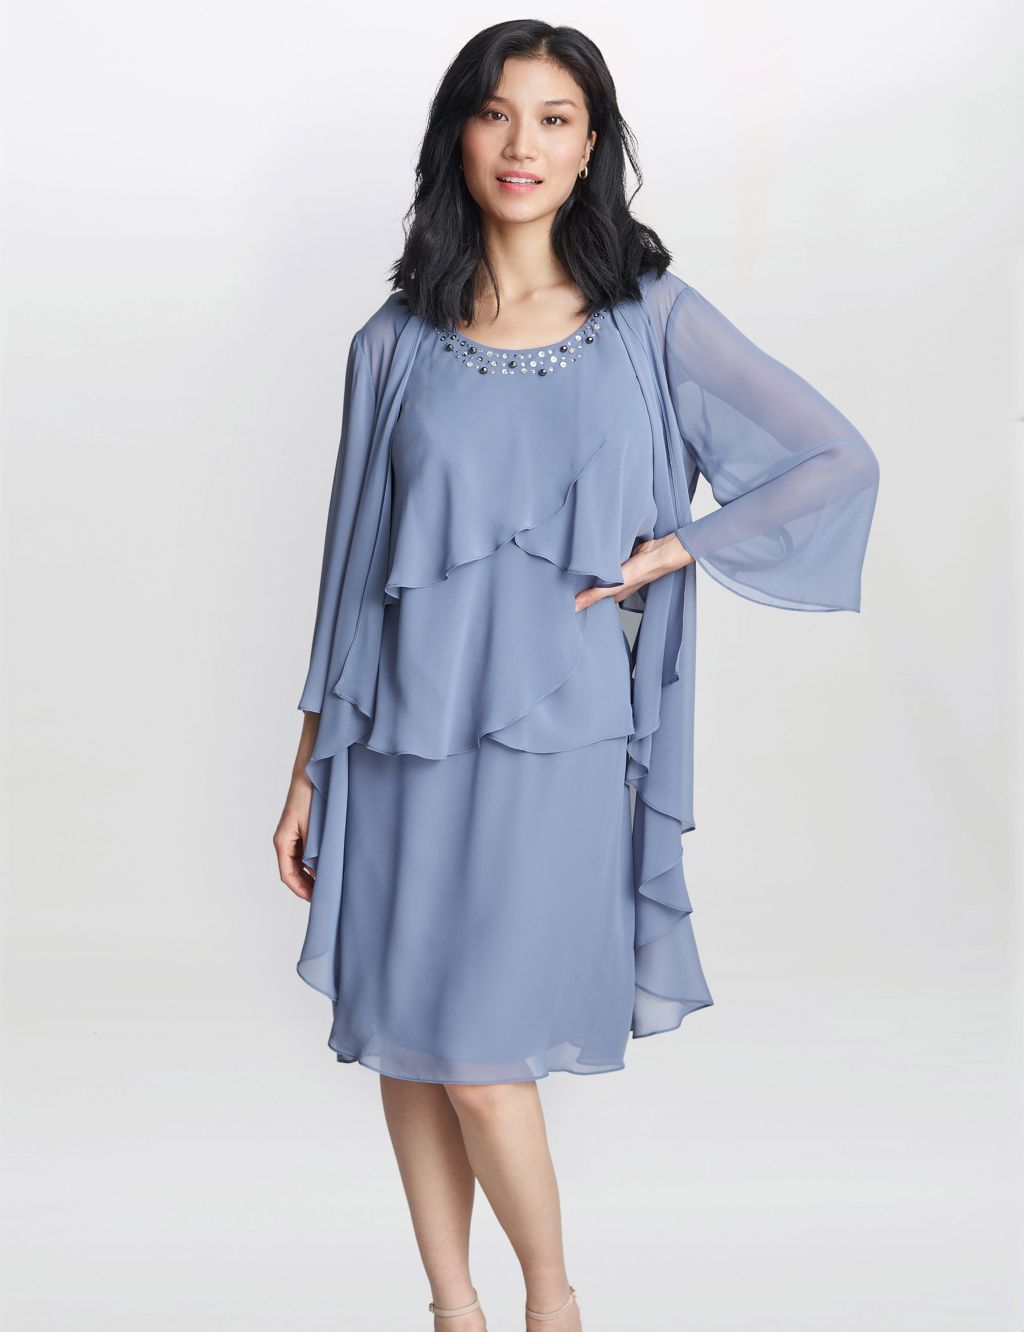 Knee Length Tiered Dress with Jacket image 1